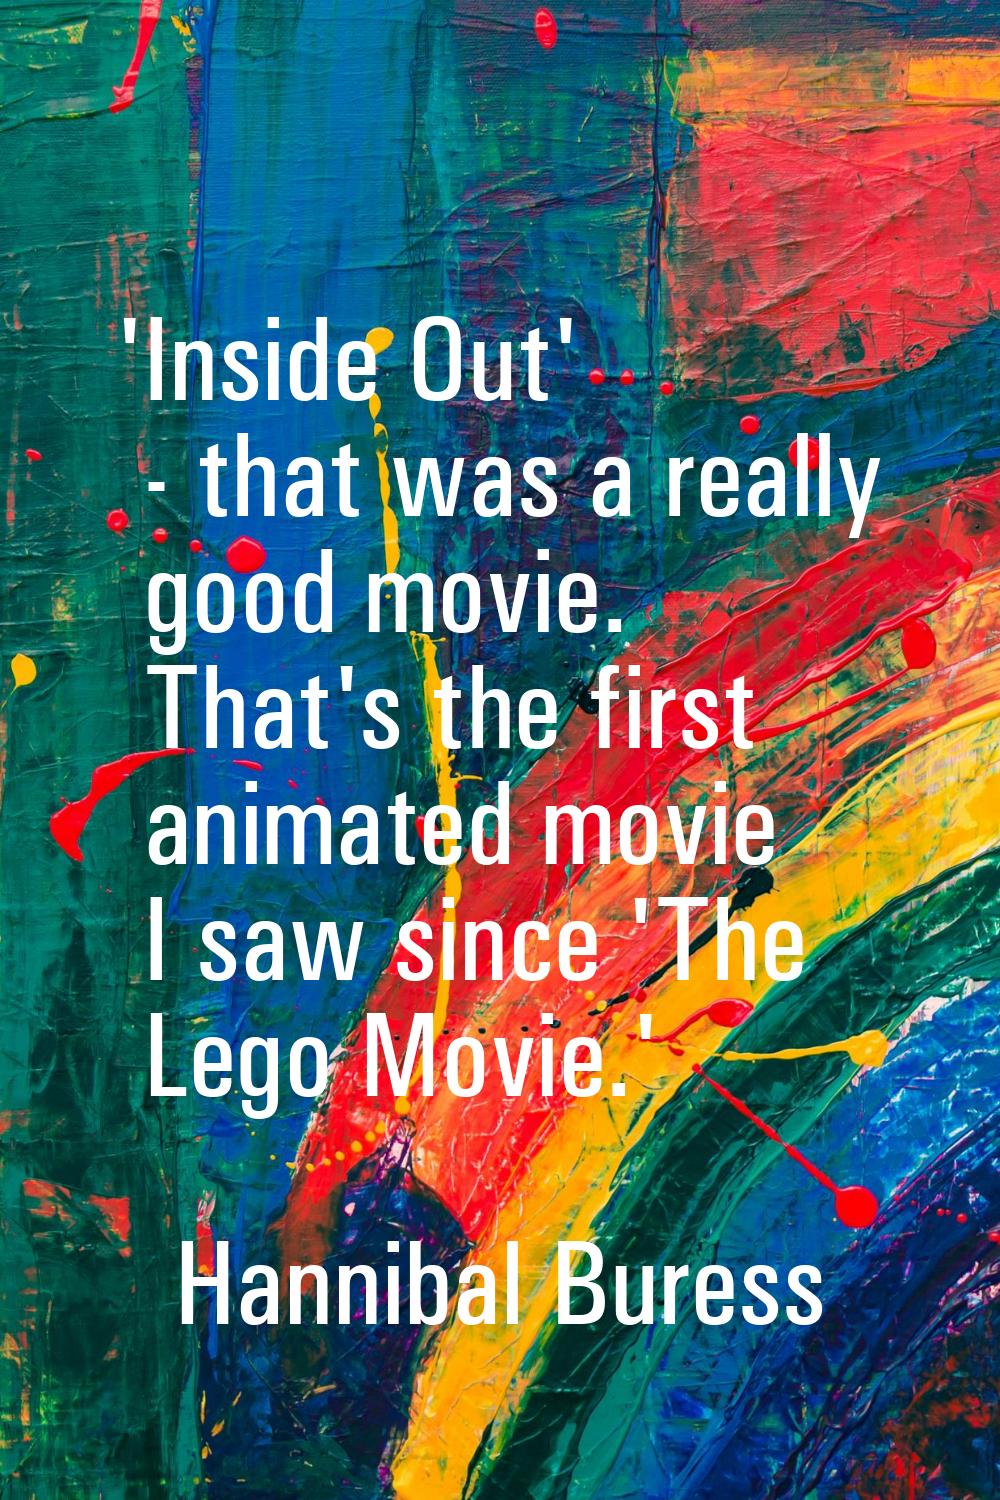 'Inside Out' - that was a really good movie. That's the first animated movie I saw since 'The Lego 